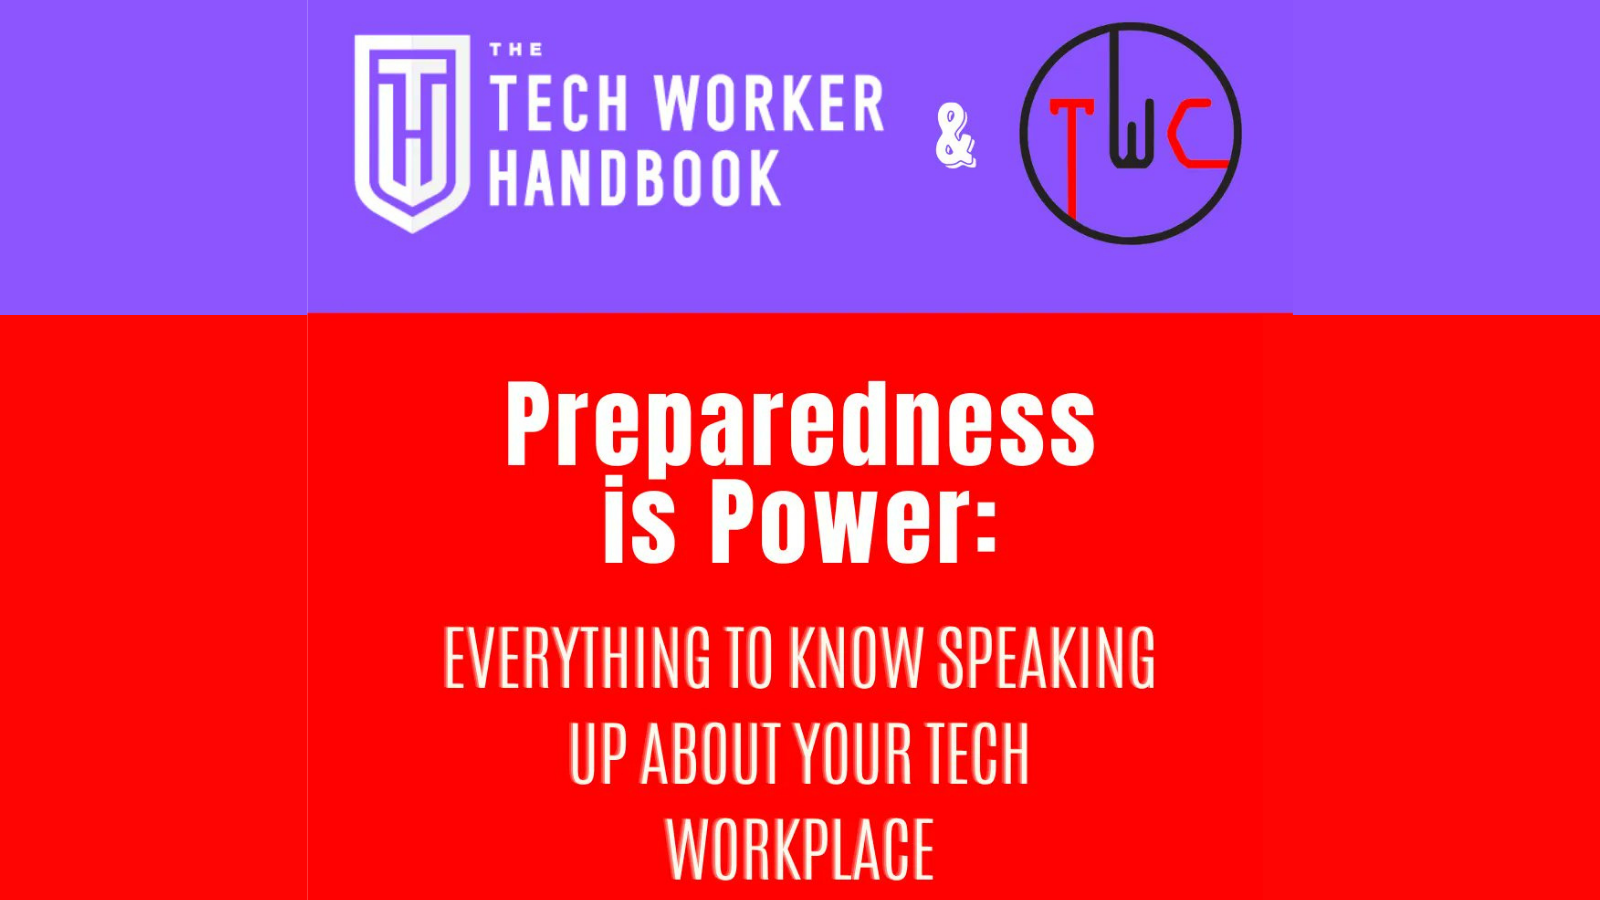 Preparedness is Power: Everything to know speaking up about your tech workplace